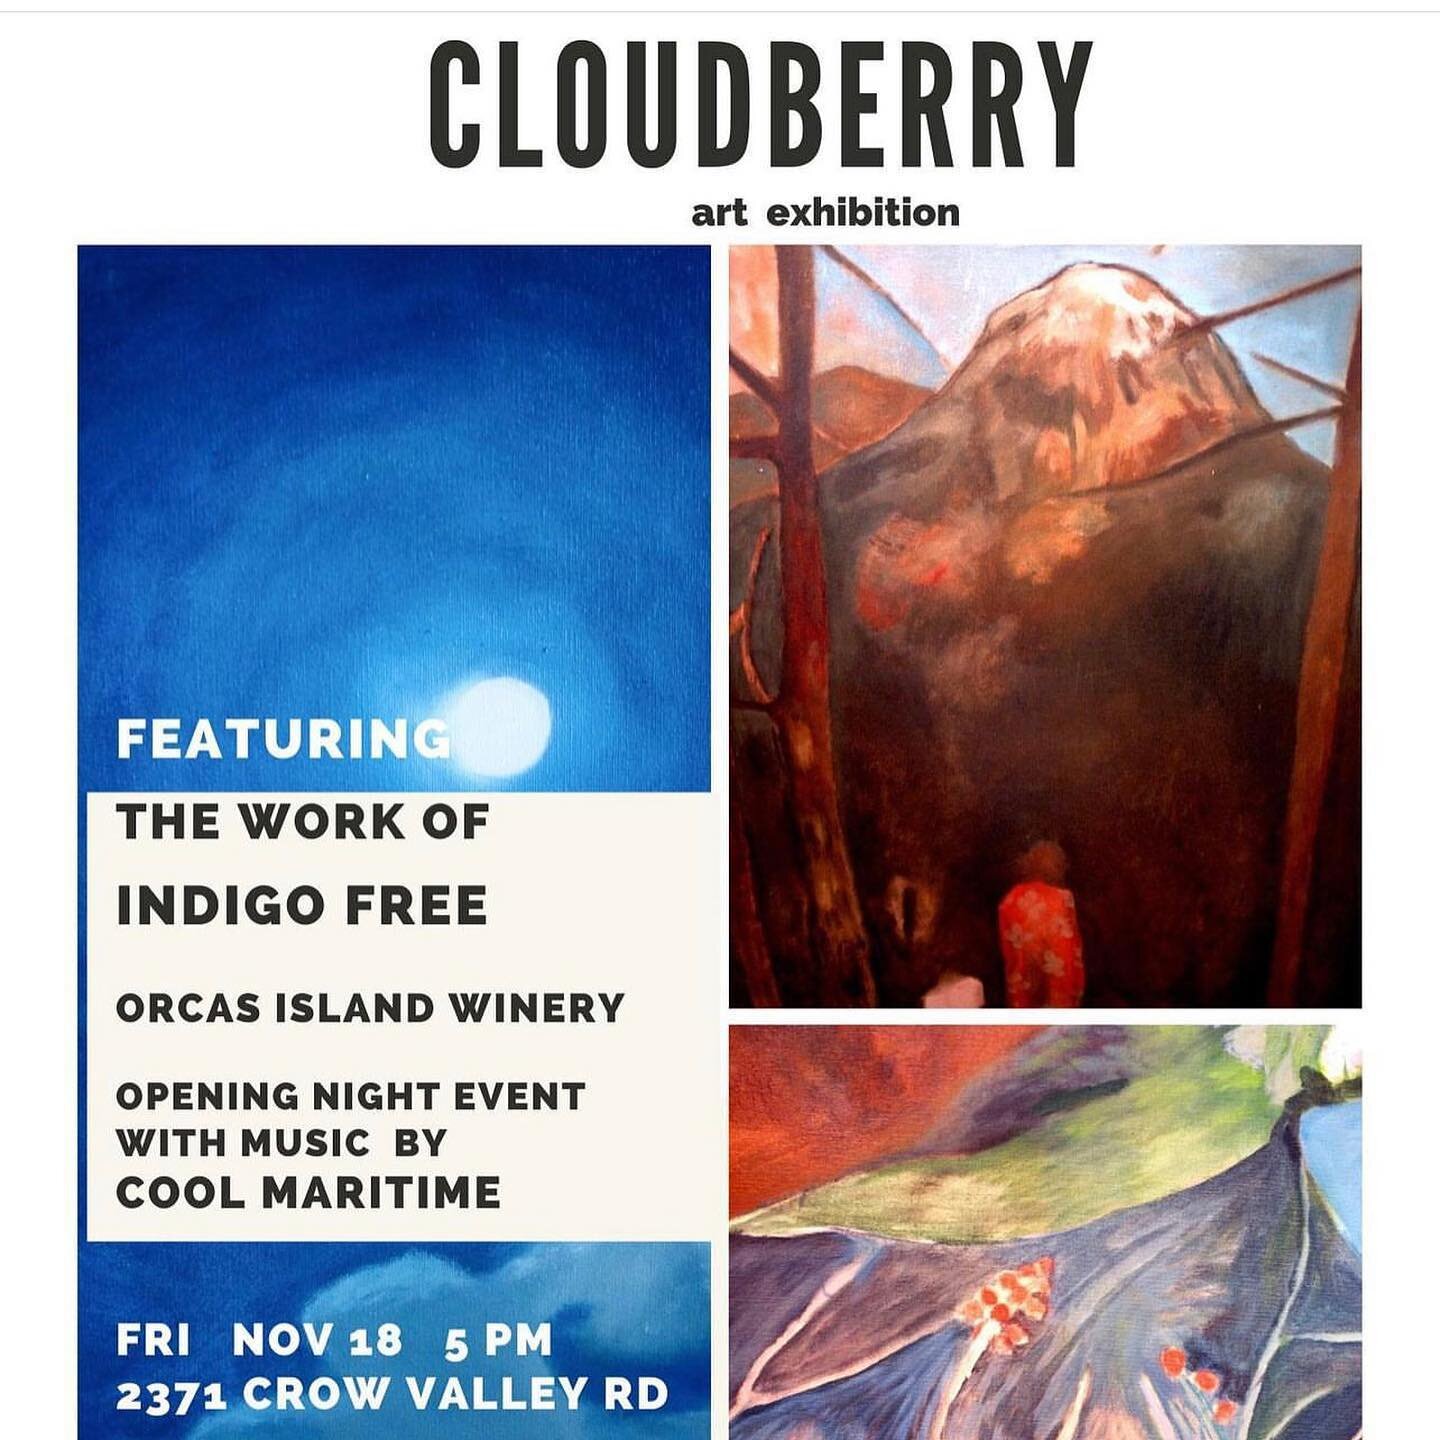 Join us tomorrow evening at 5 PM for the opening of CLOUDBERRY featuring all new works from the remarkably evocative emerging artist and painter, Indigo Free. 

Indigo reveals her mysterious yet distinct style, mythic form and big sky mind through he